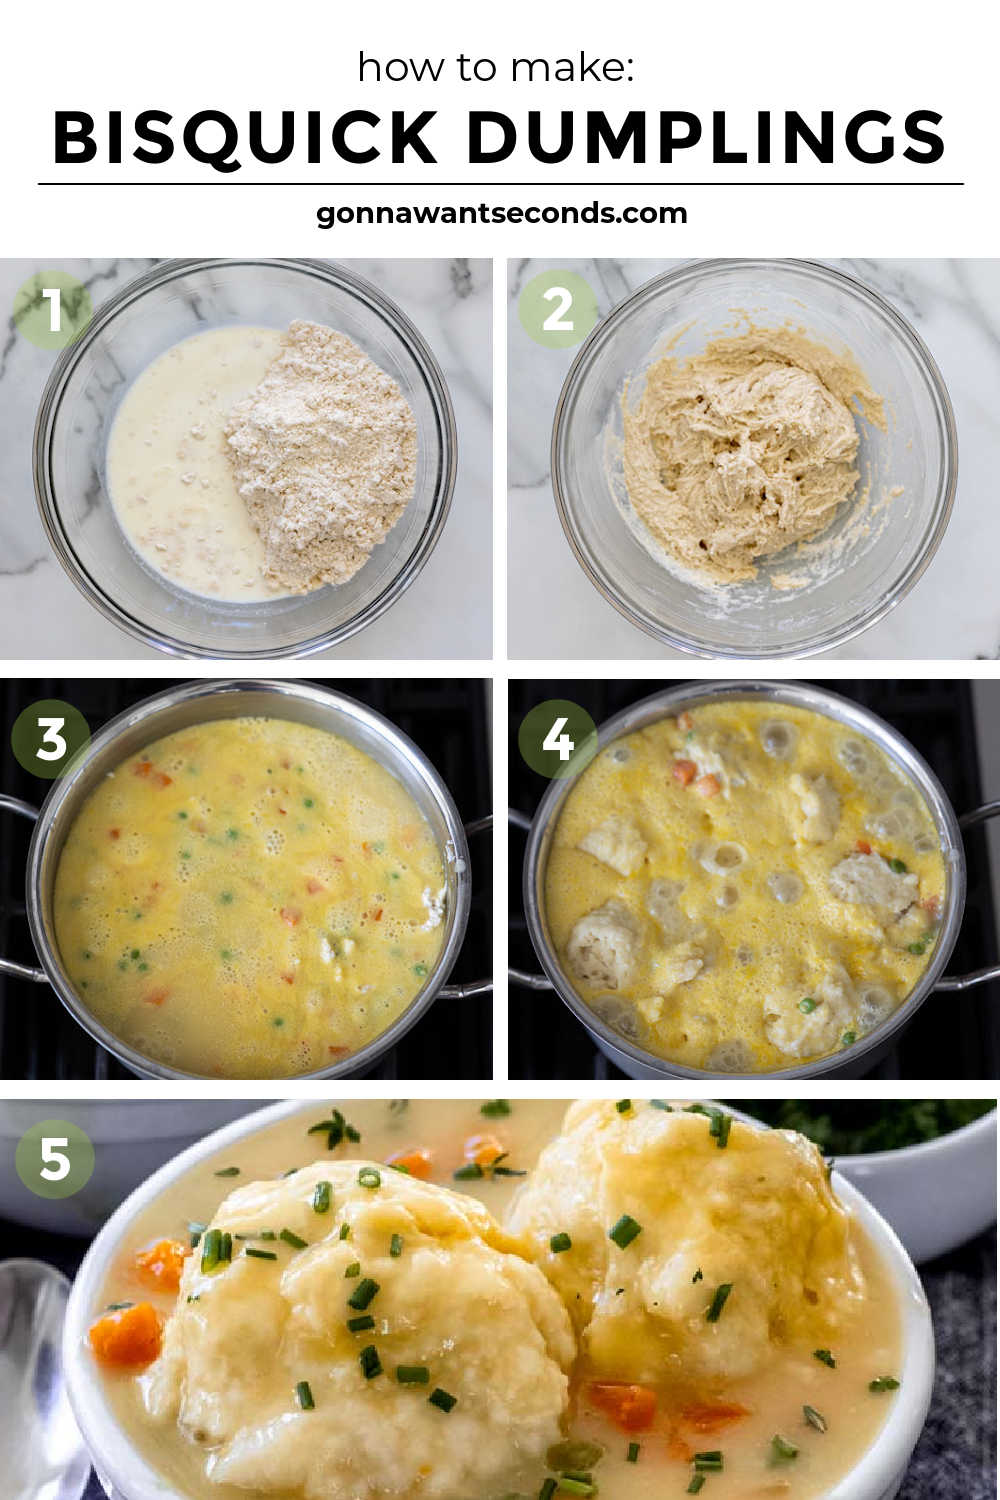 Step by step how to make Bisquick Dumplings